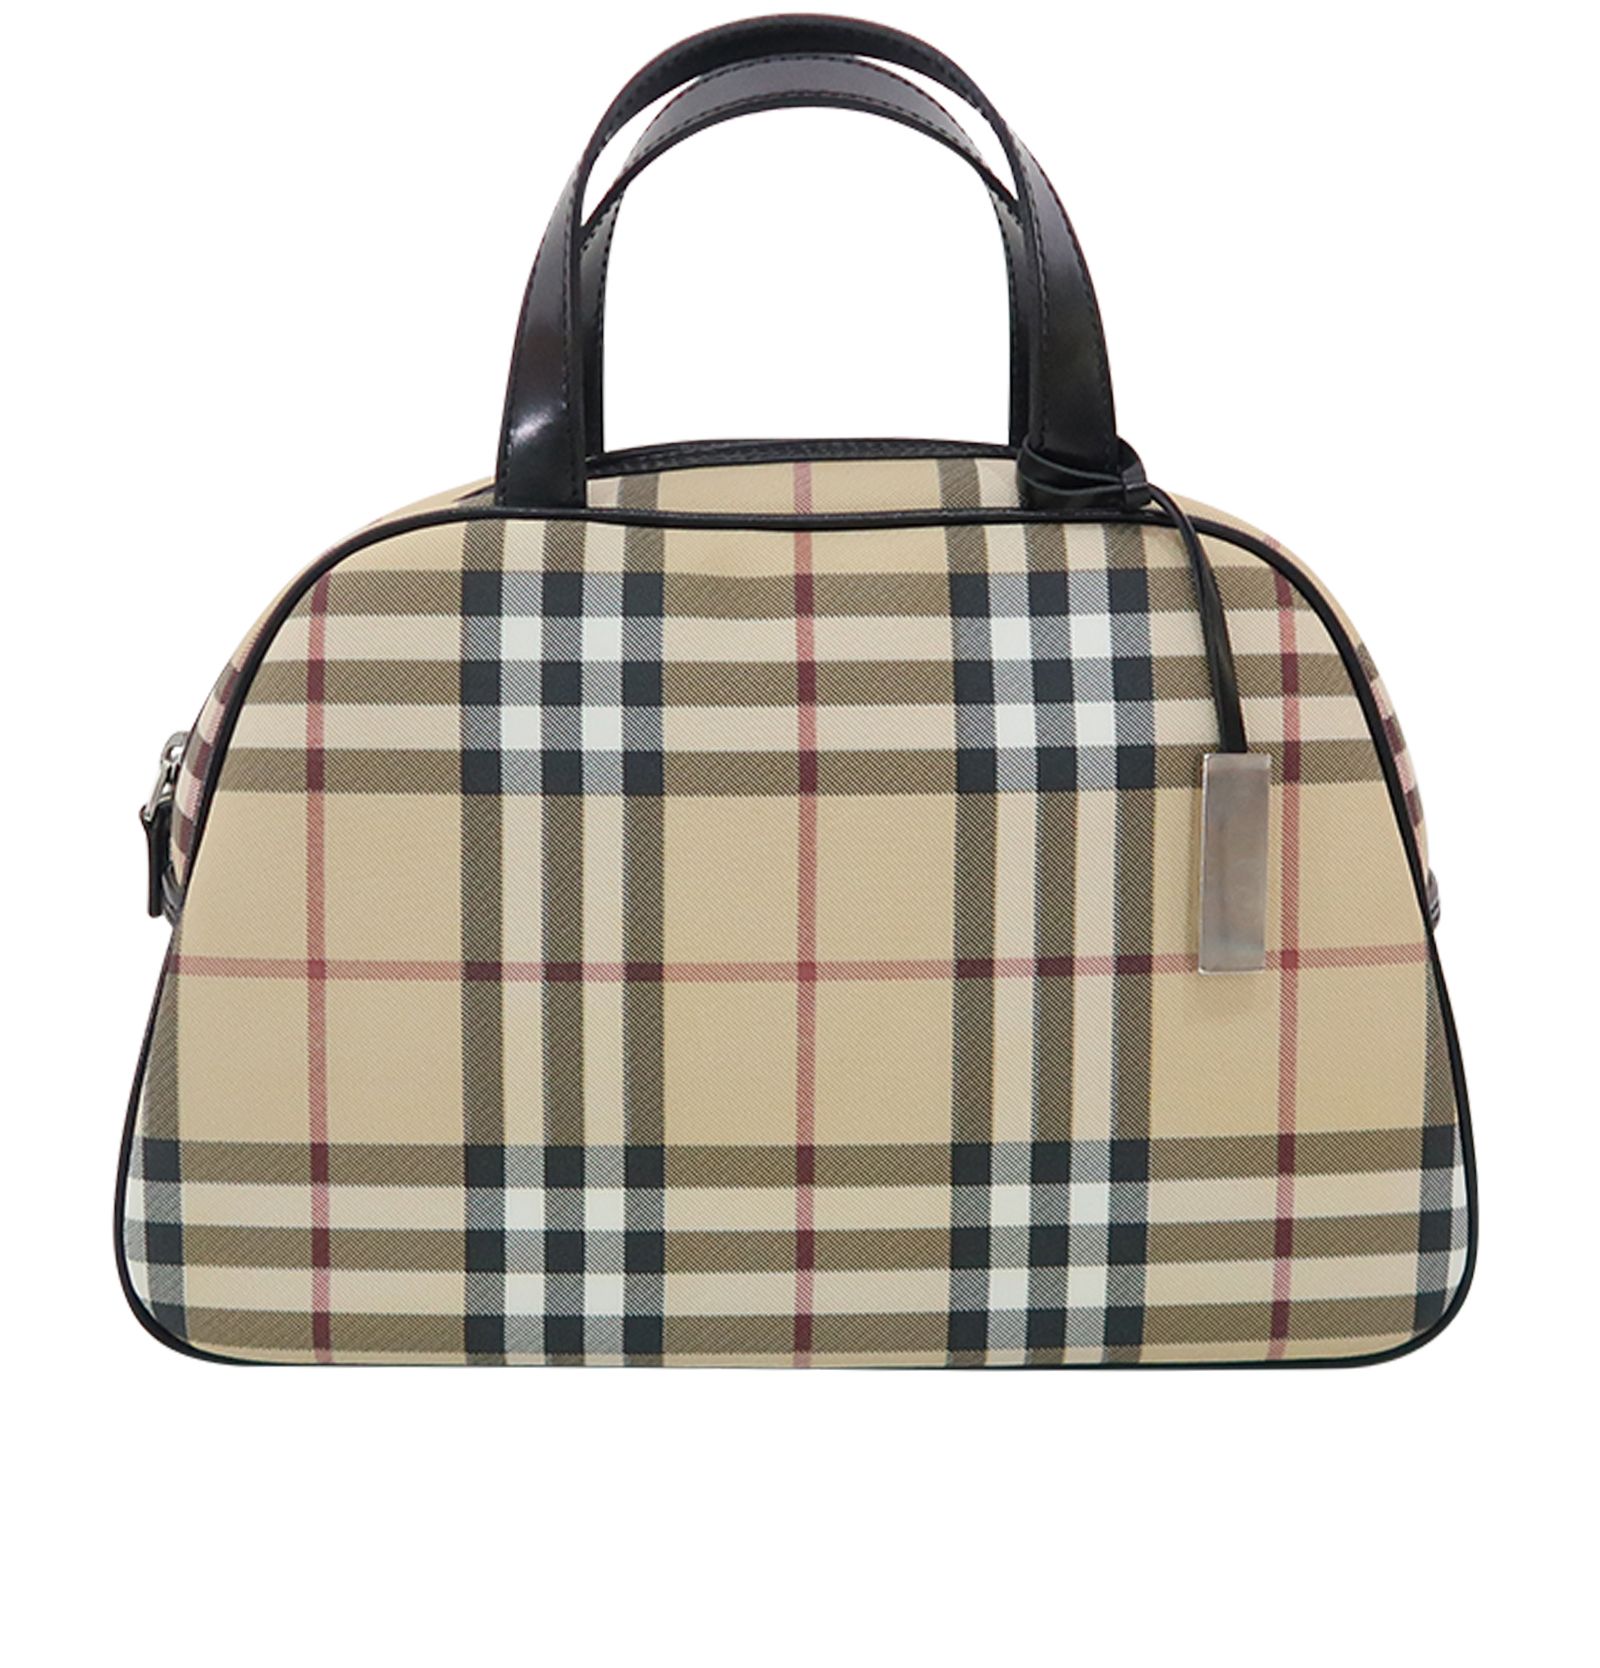 Brand new! Burberry Bowling Bag. - clothing & accessories - by owner -  apparel sale - craigslist